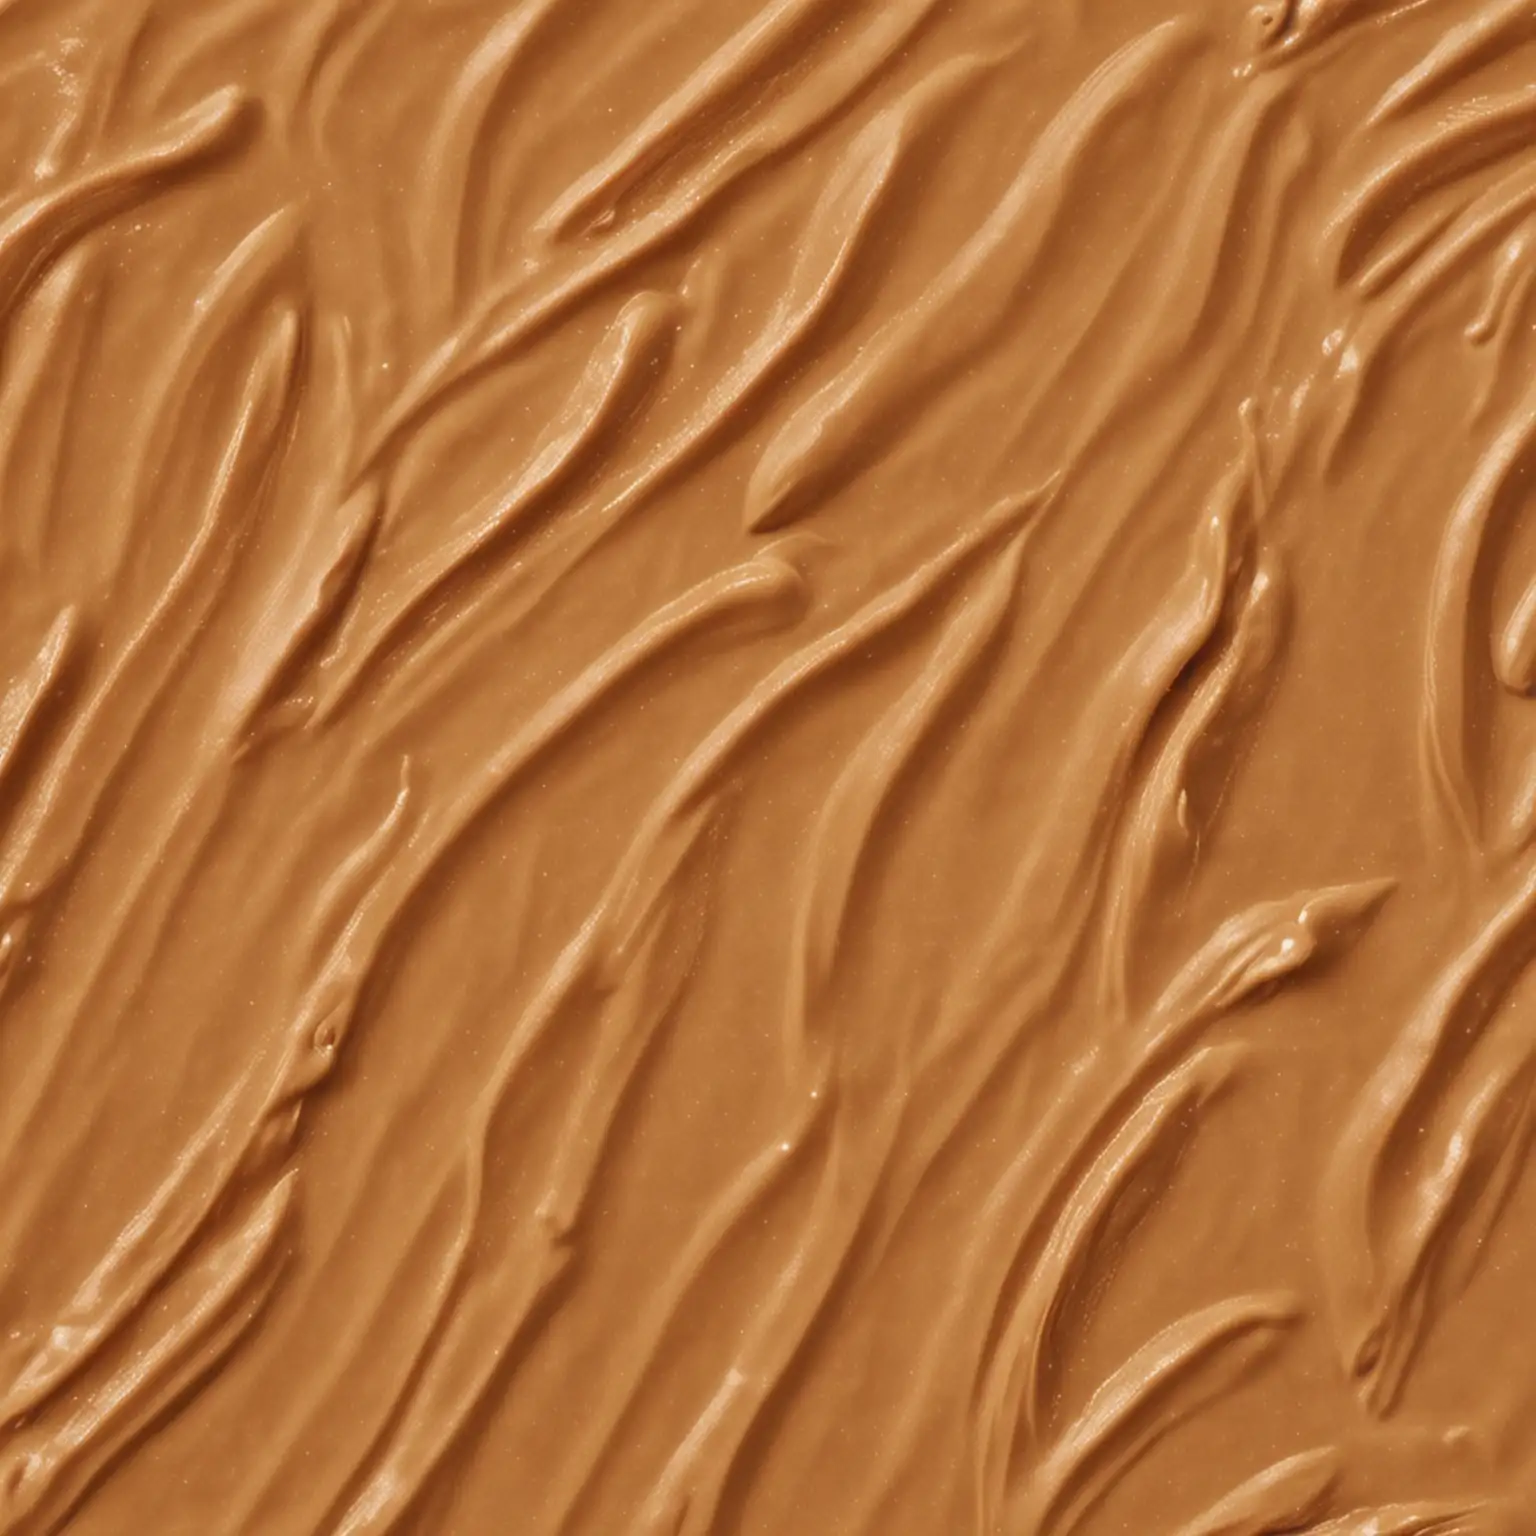 being hunted down but being saved by peanut butter
[style: peanut butter creamy texture]